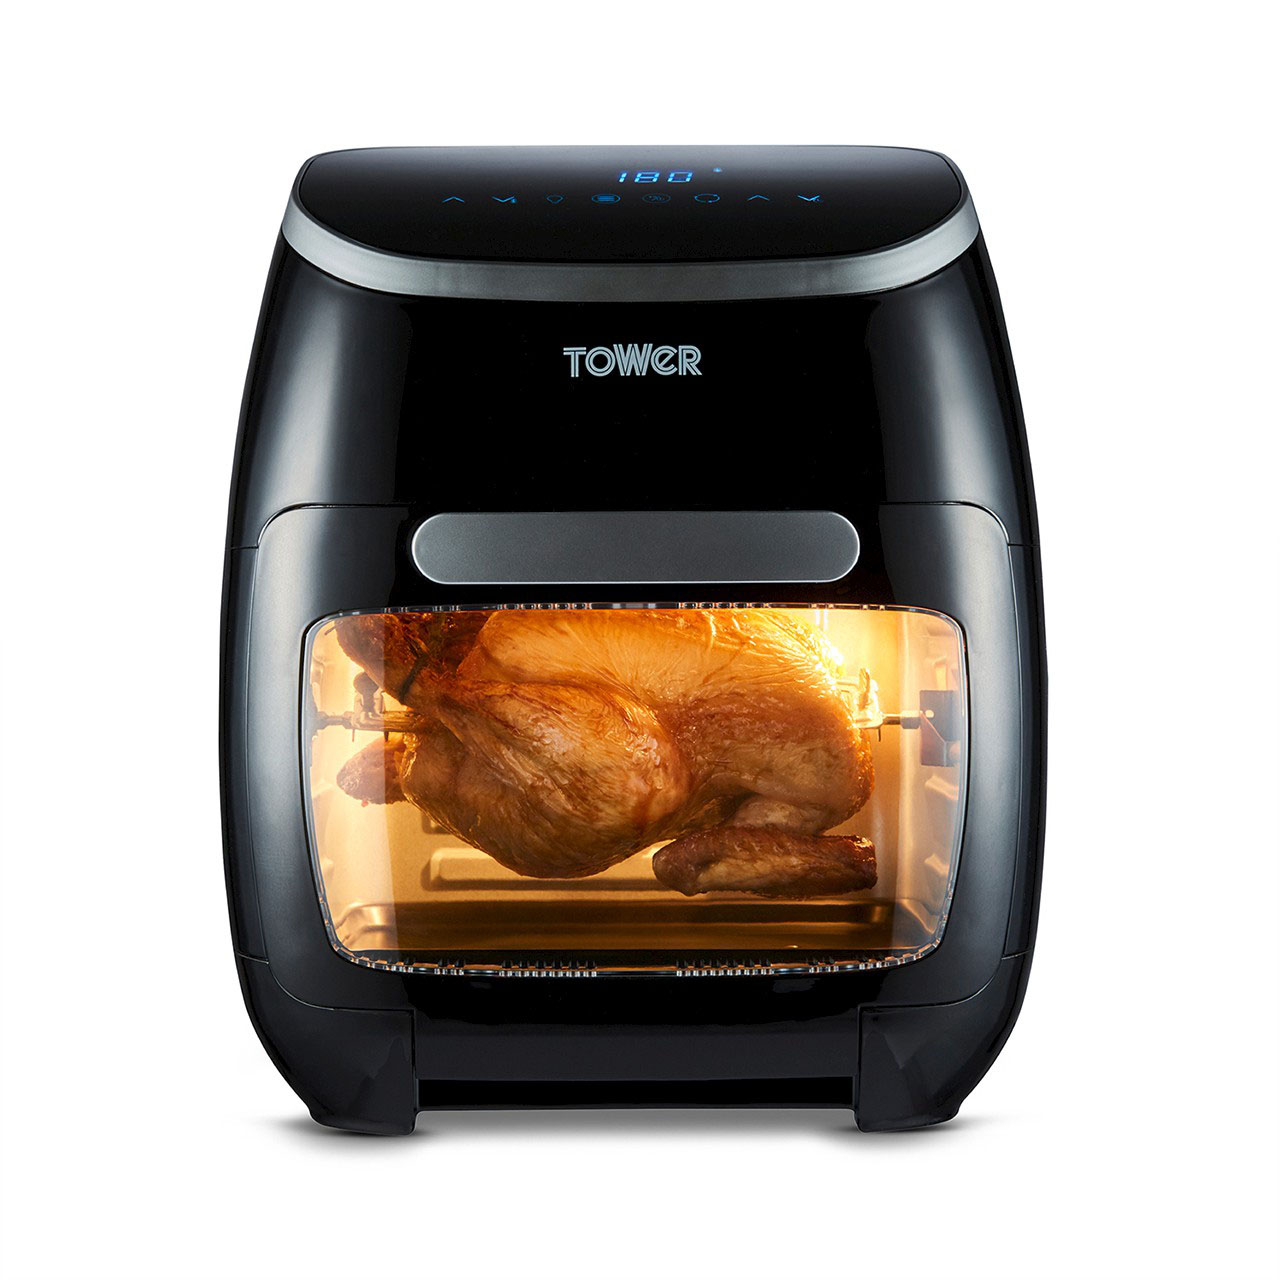 Tower Xpress Pro 11 Litre 10-in-1 Digital Air Fryer Oven with Rotisserie